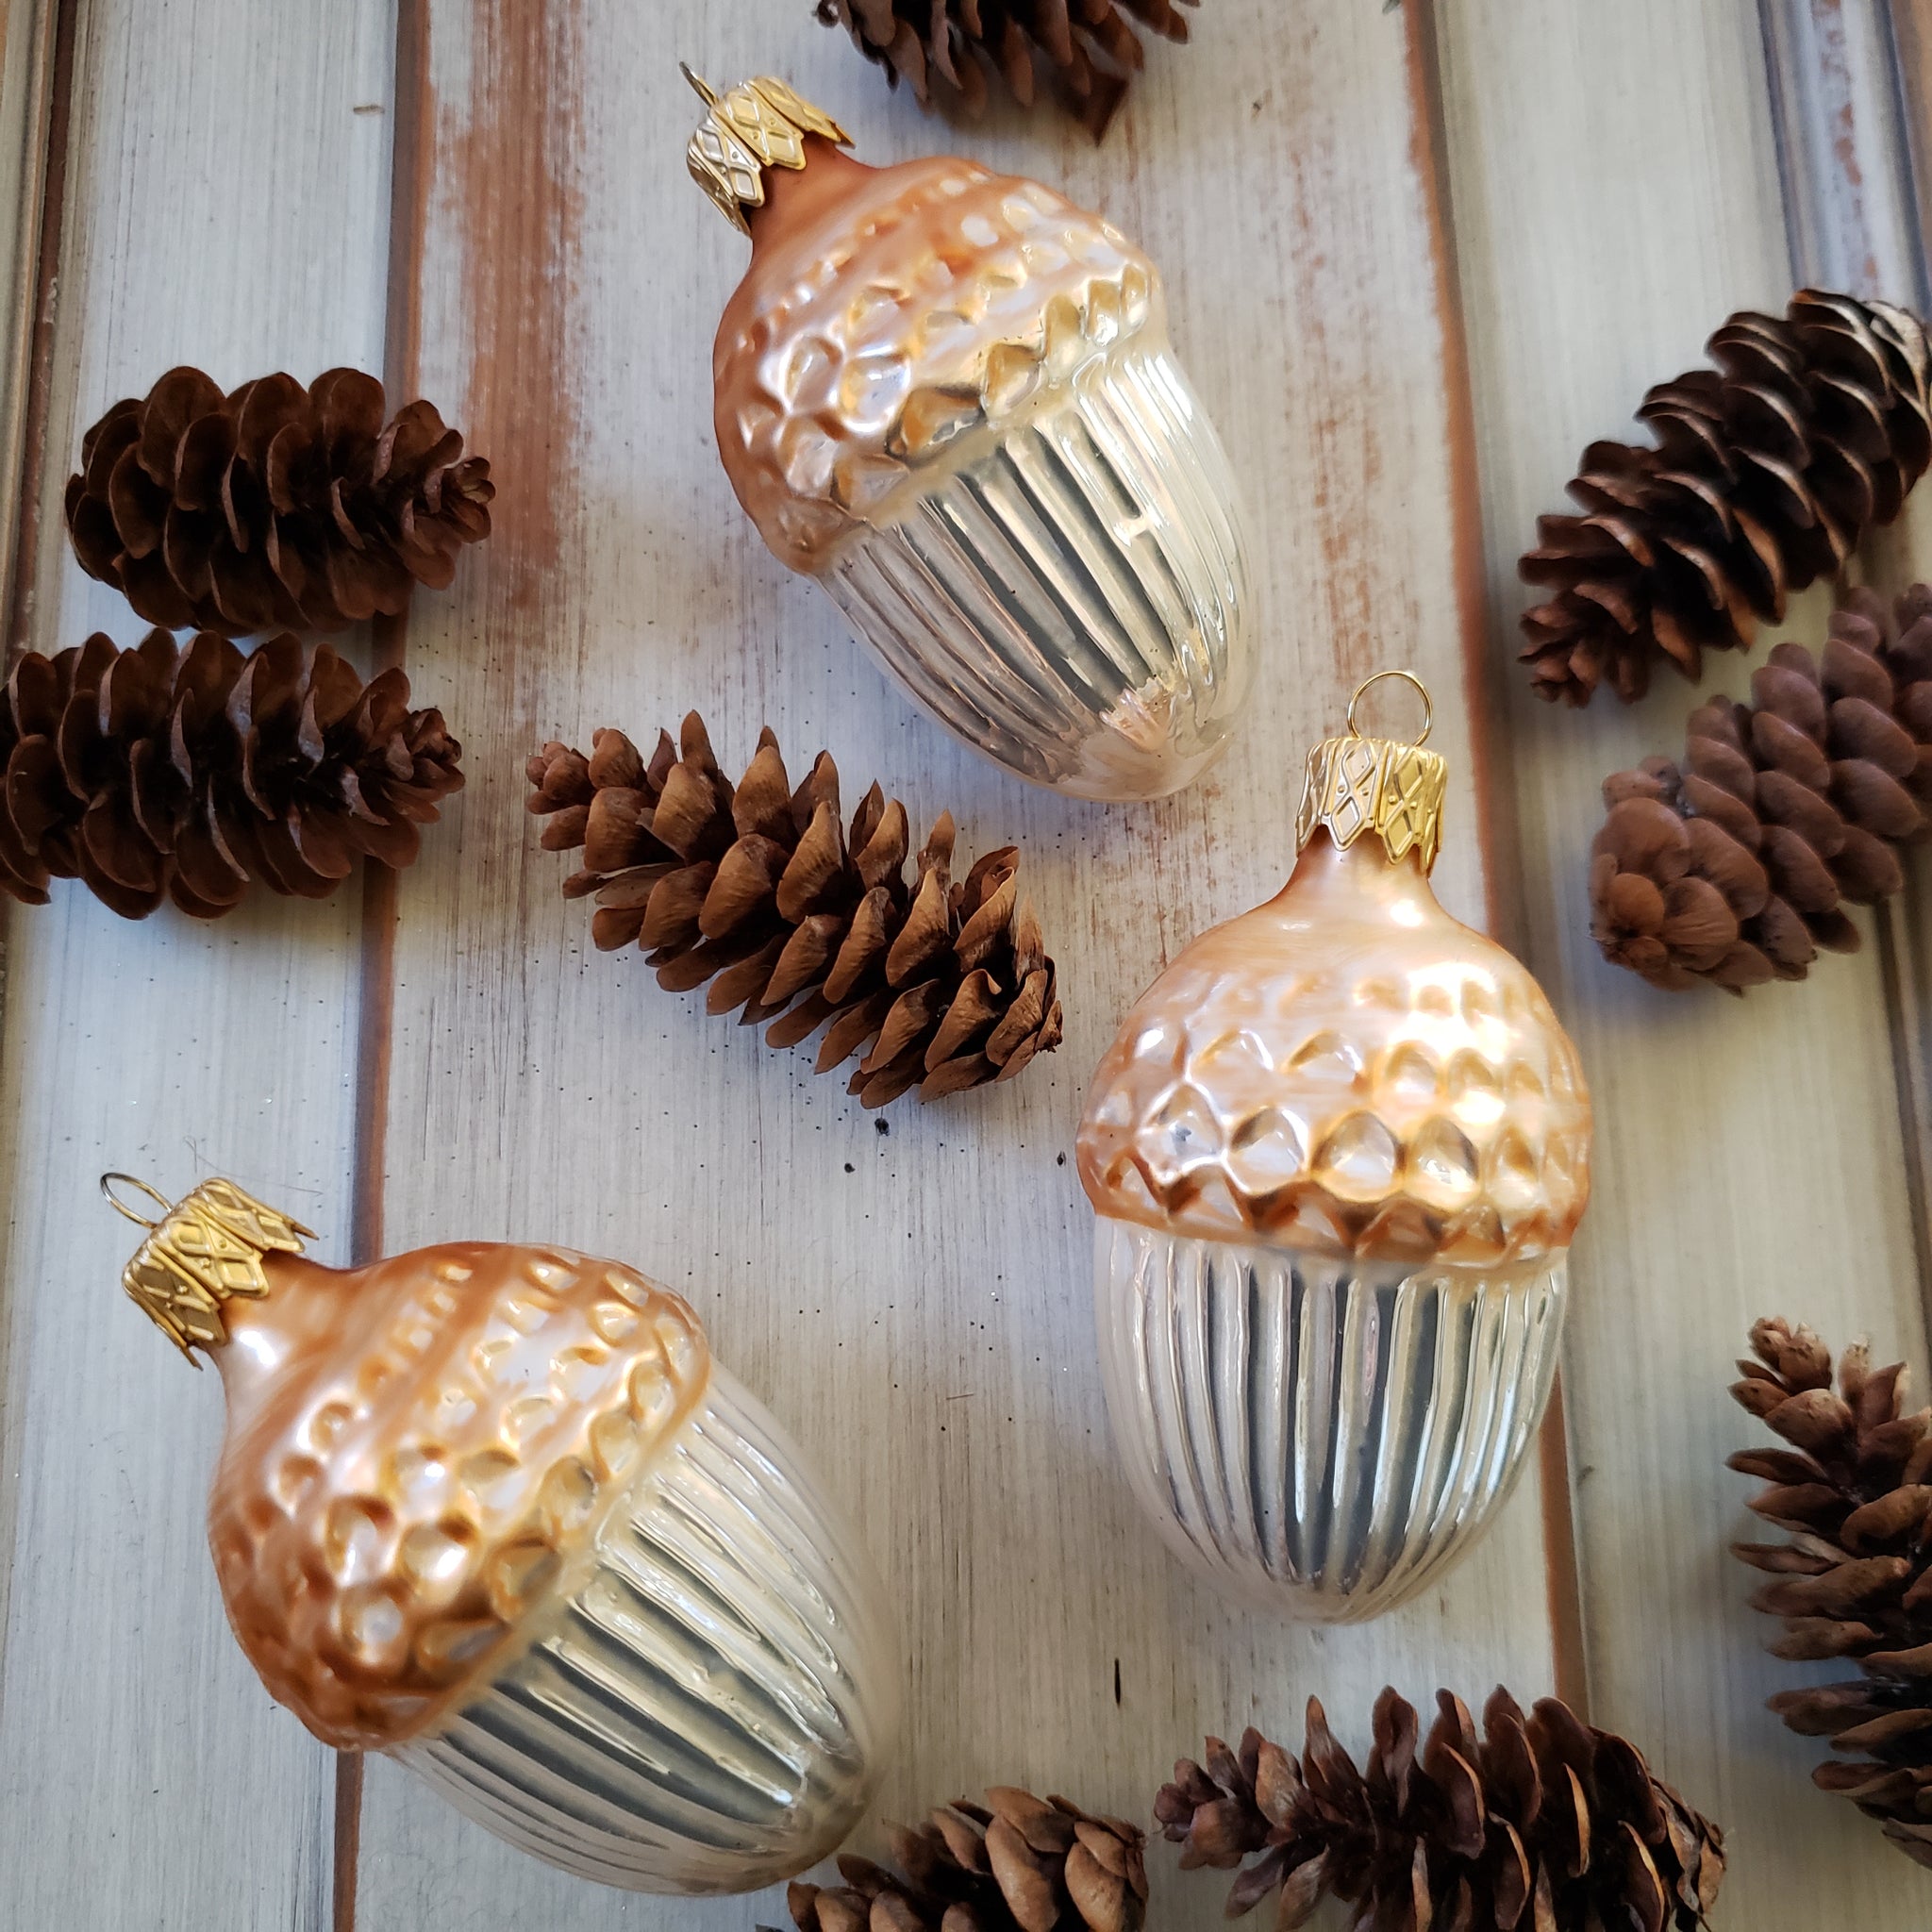 Glass Acorn Ornament - Woodland glass ornament handcrafted in Europe, where Old World Christmas ornament making has a long tradition.